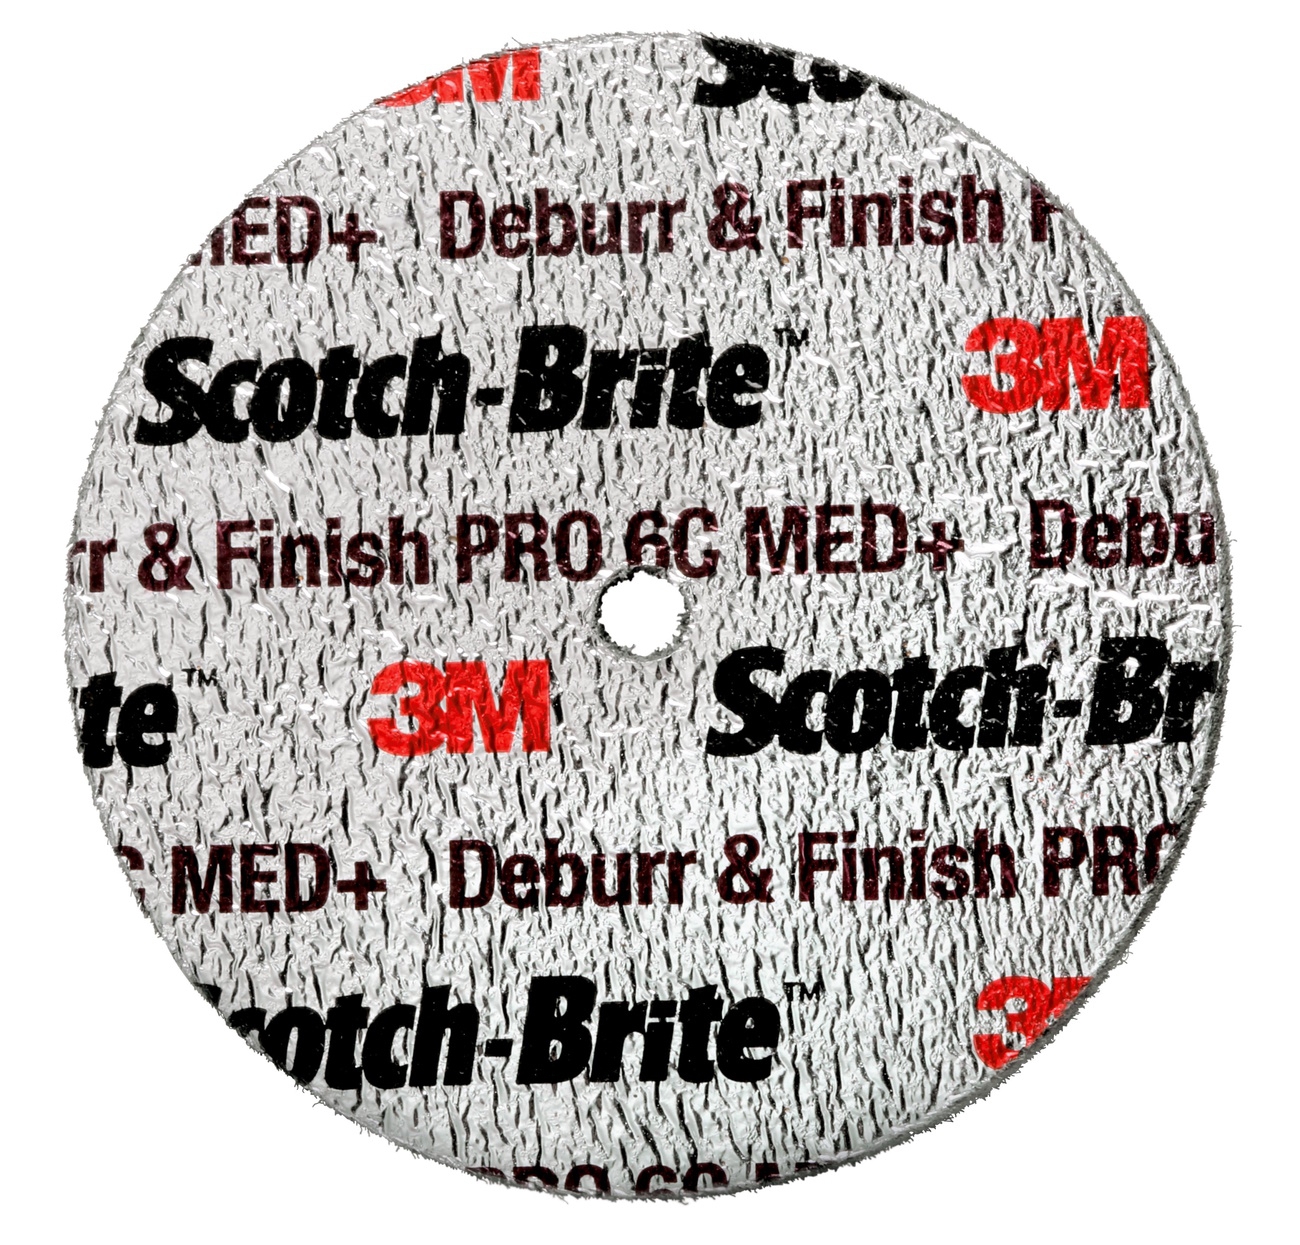 3M Scotch-Brite Deburr and Finish PRO compact disc DP-UW, 75 mm x 19 mm x 6.35 mm, 6C MED+